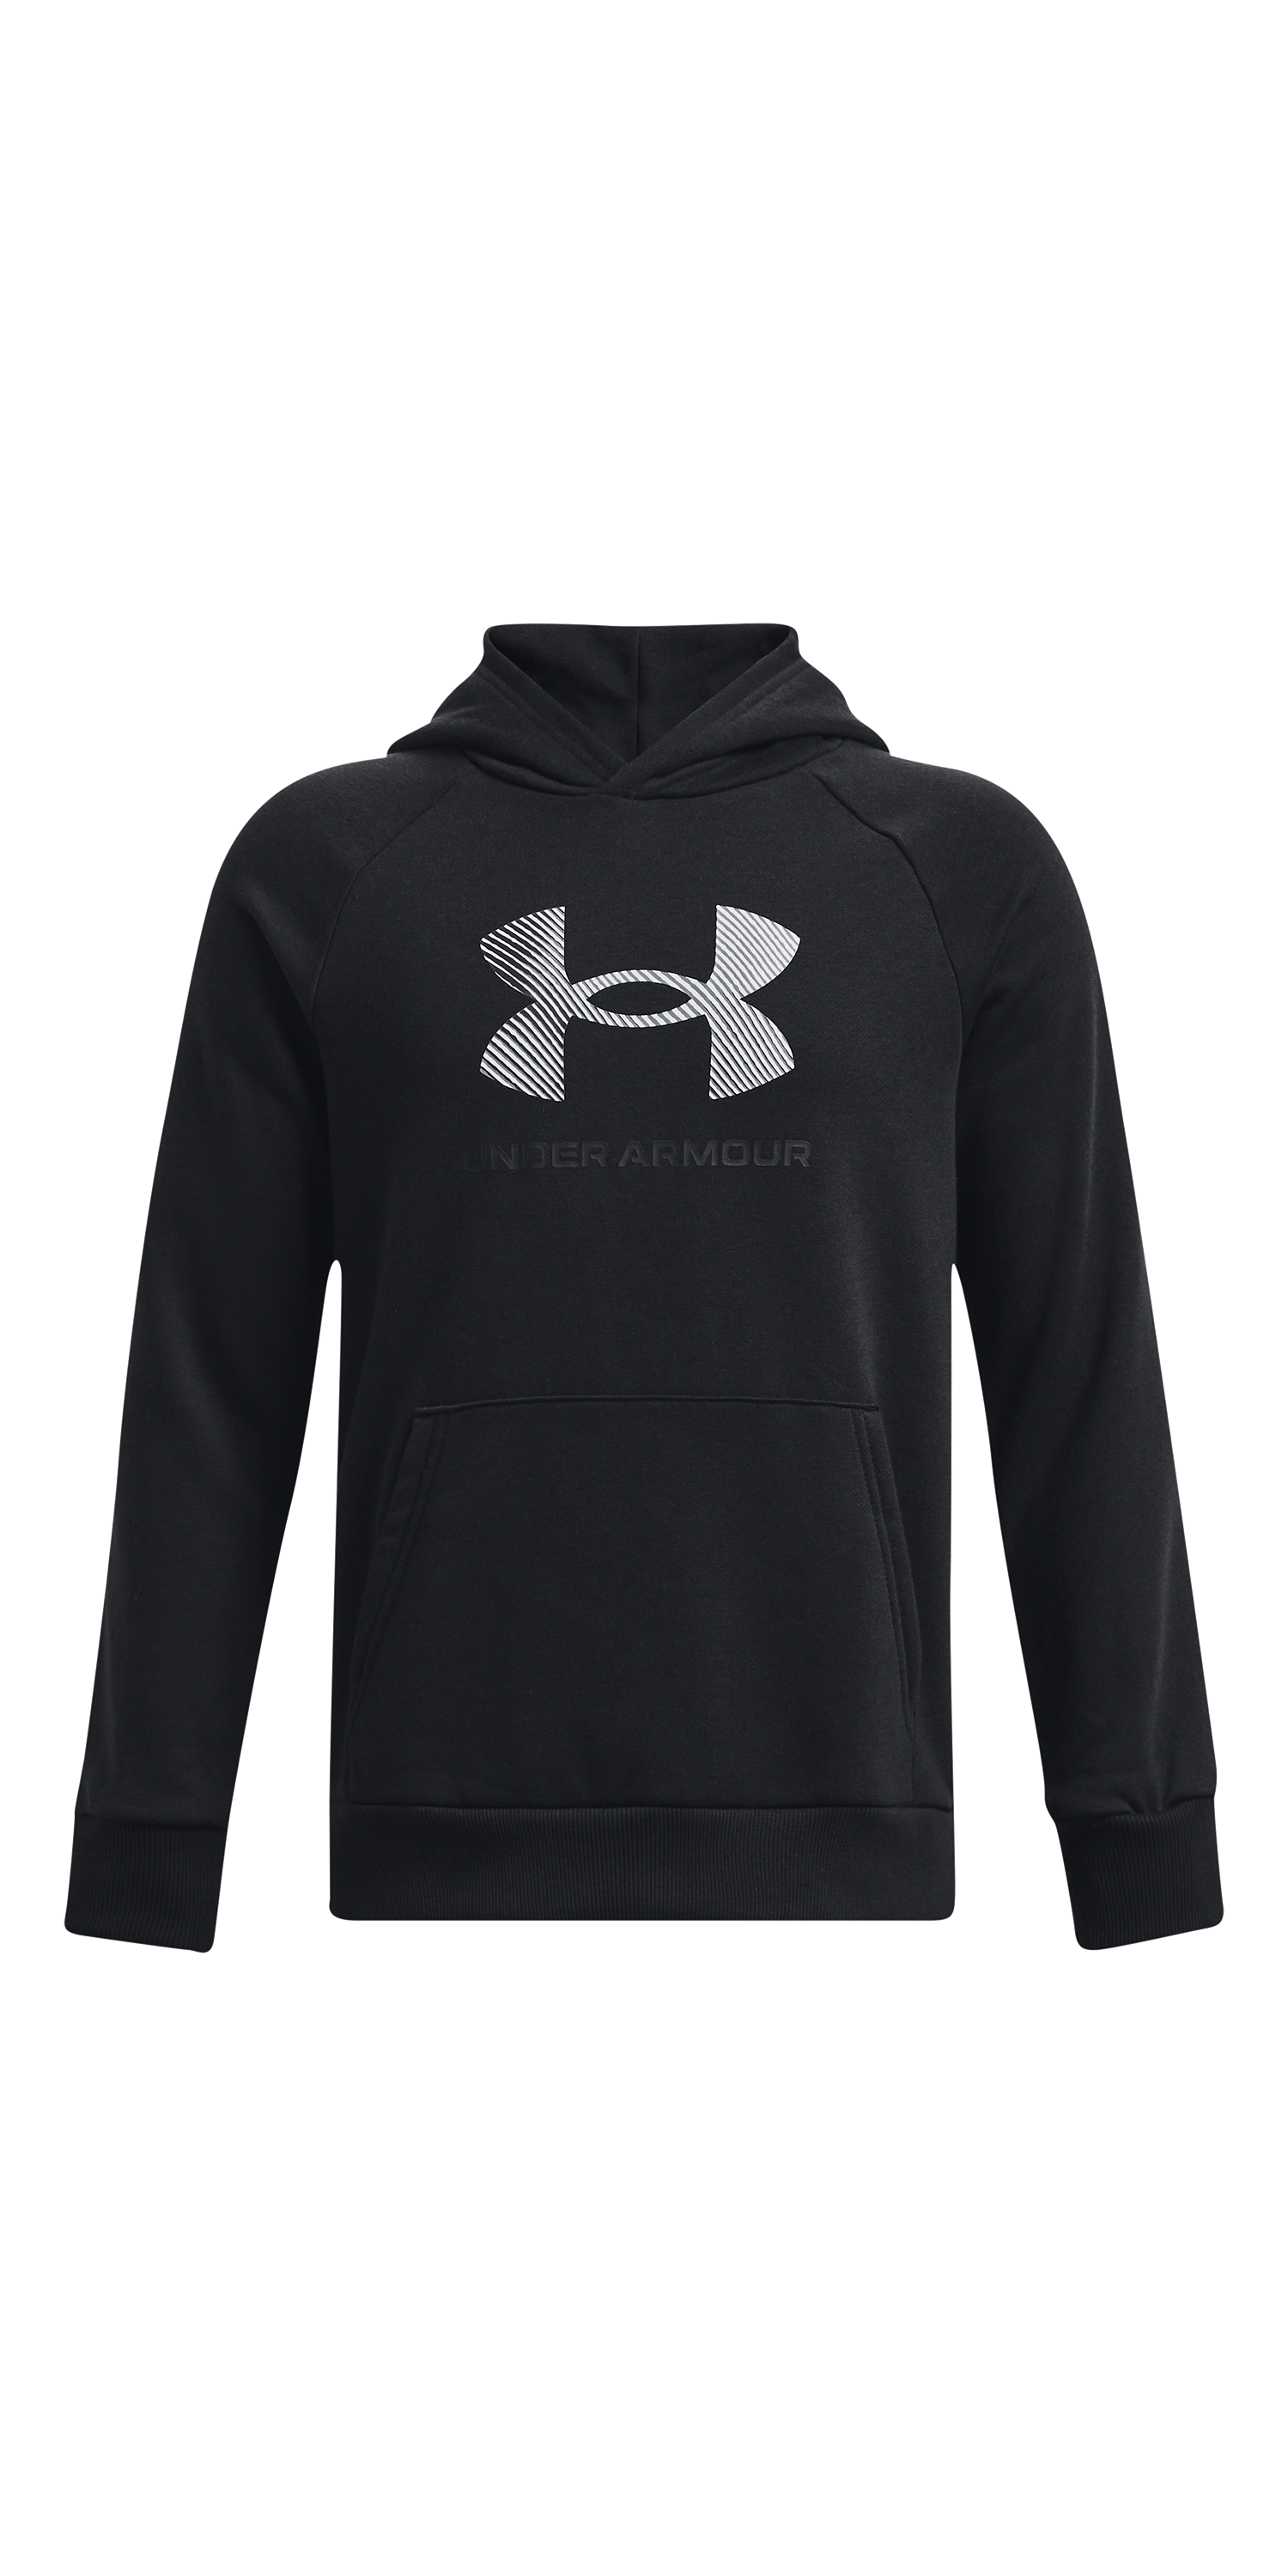 Girls' Rival Fleece Joggers from Under Armour